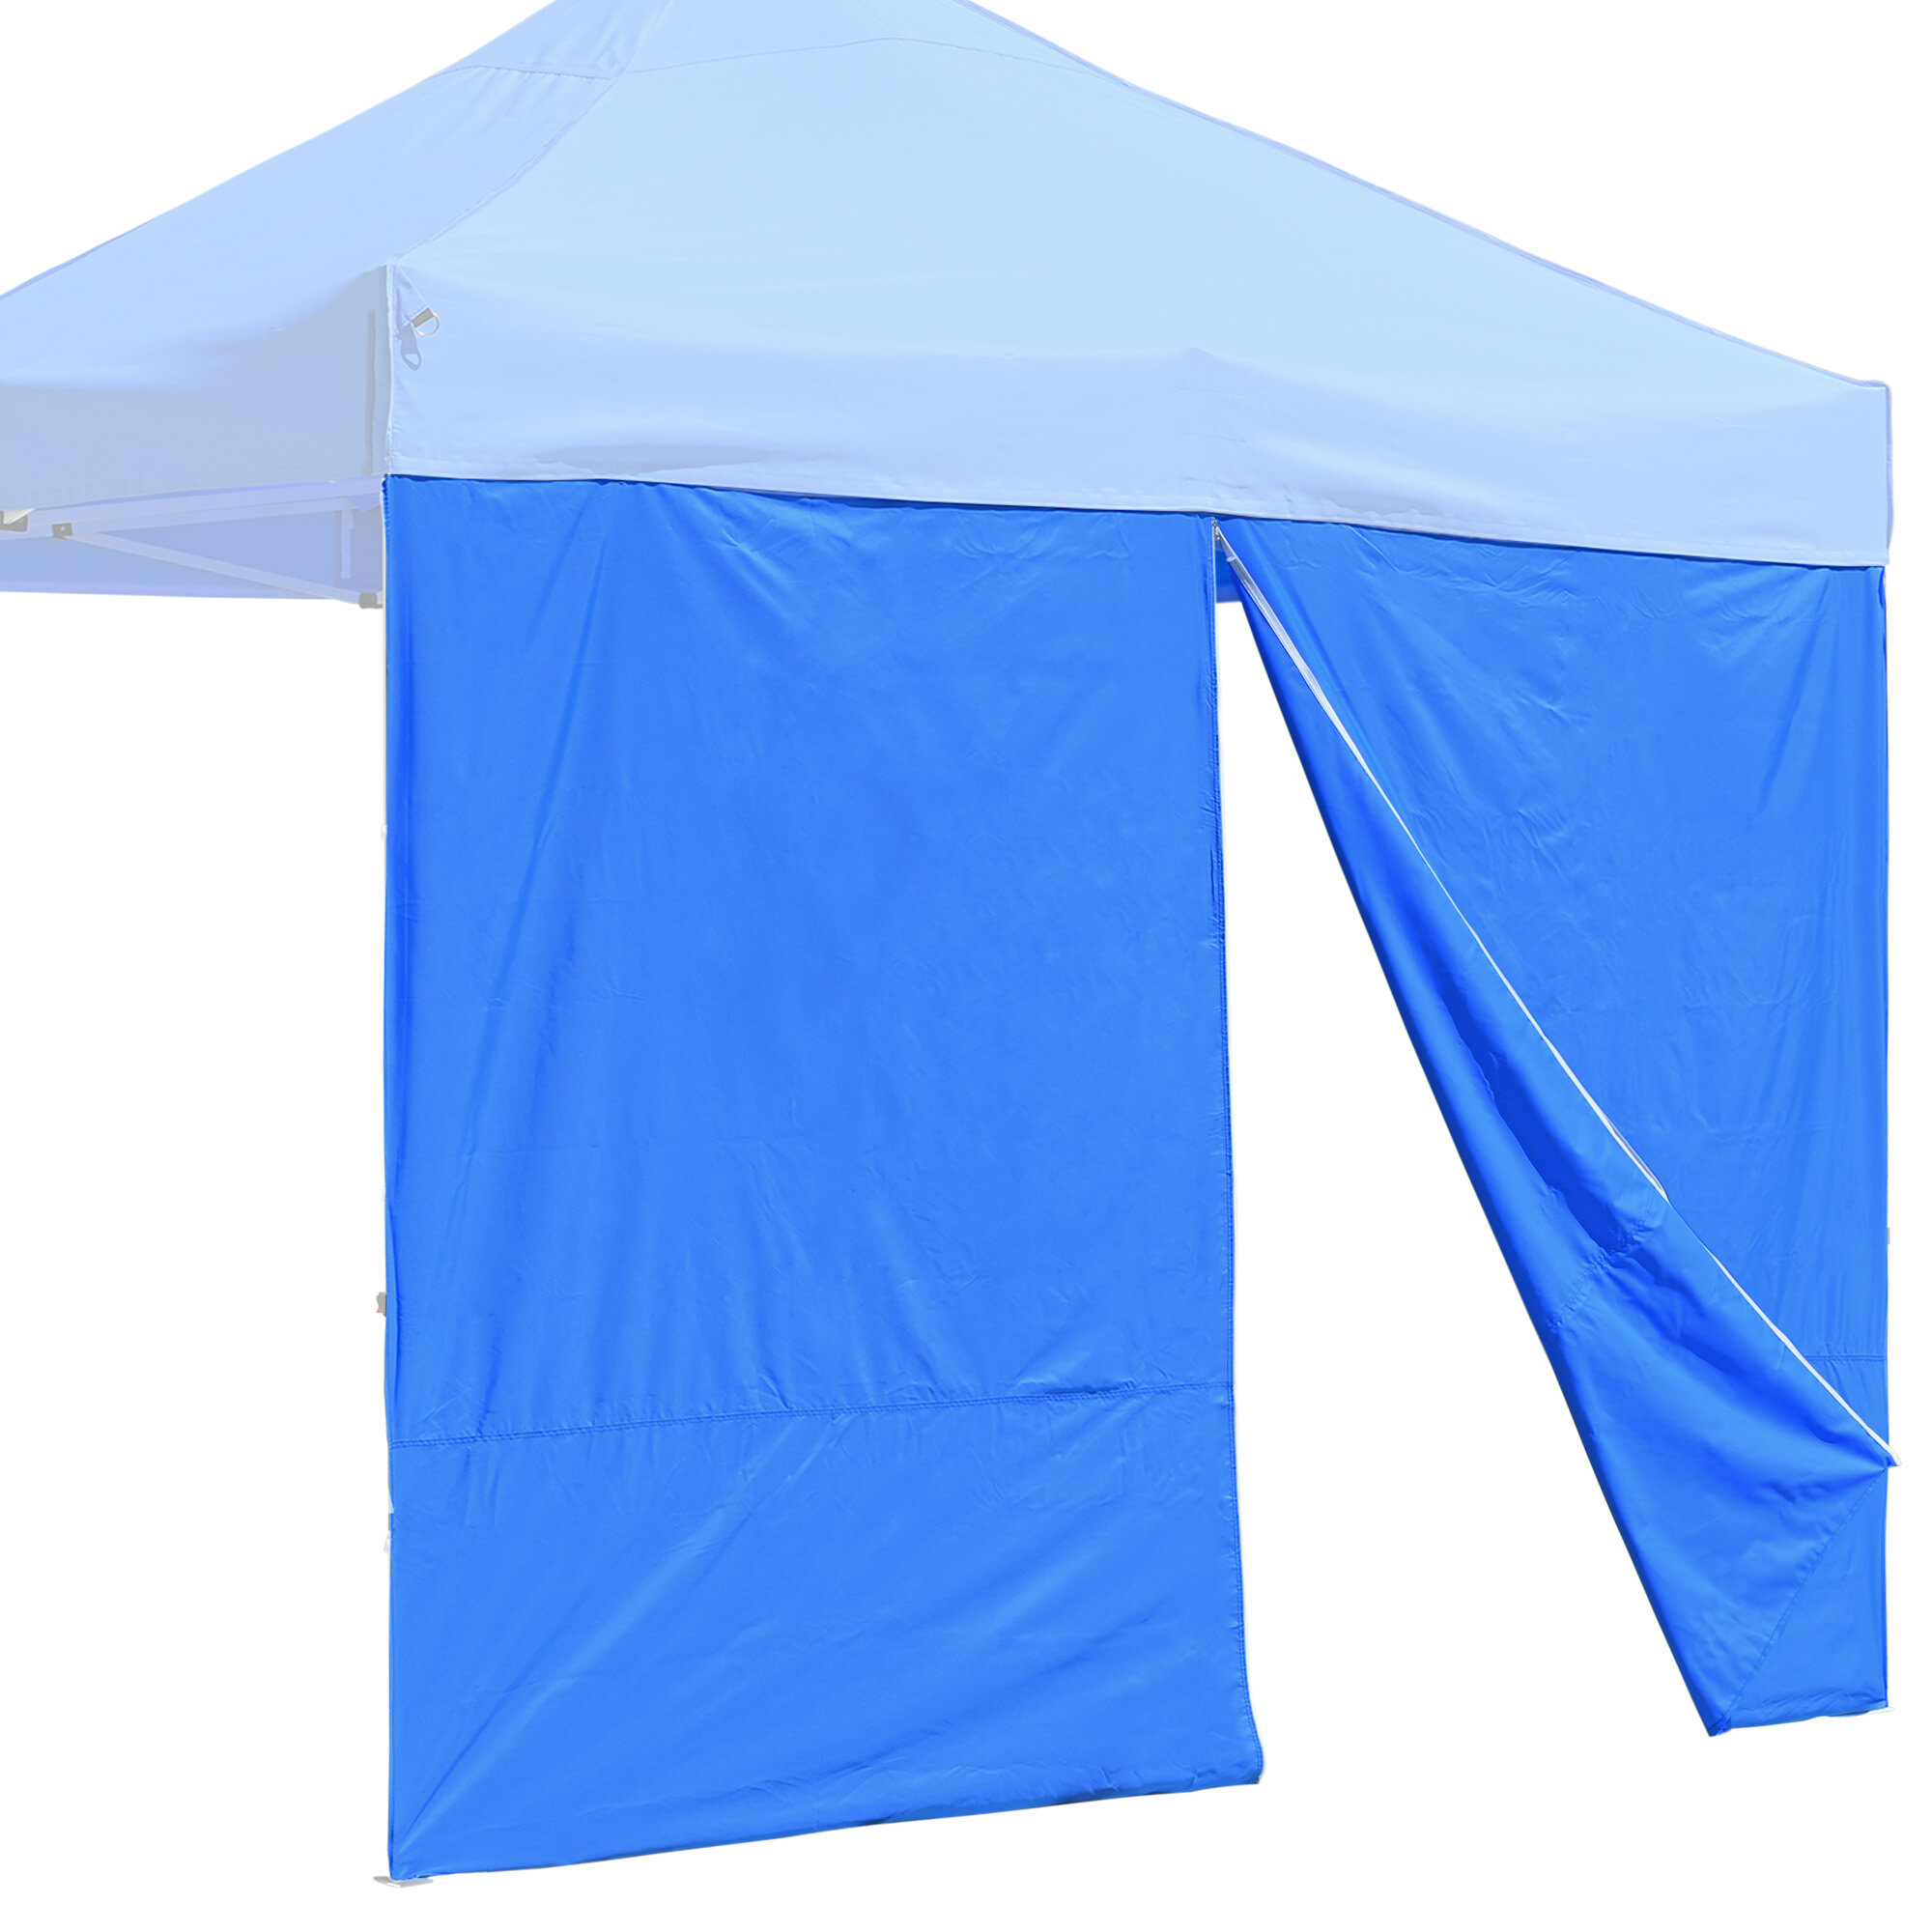 Yescom EZ Up Canopy Tent Side Wall 10x10 Ft Pop Up Party Tent Sun Wall Sidewall Shelter with Zipper 